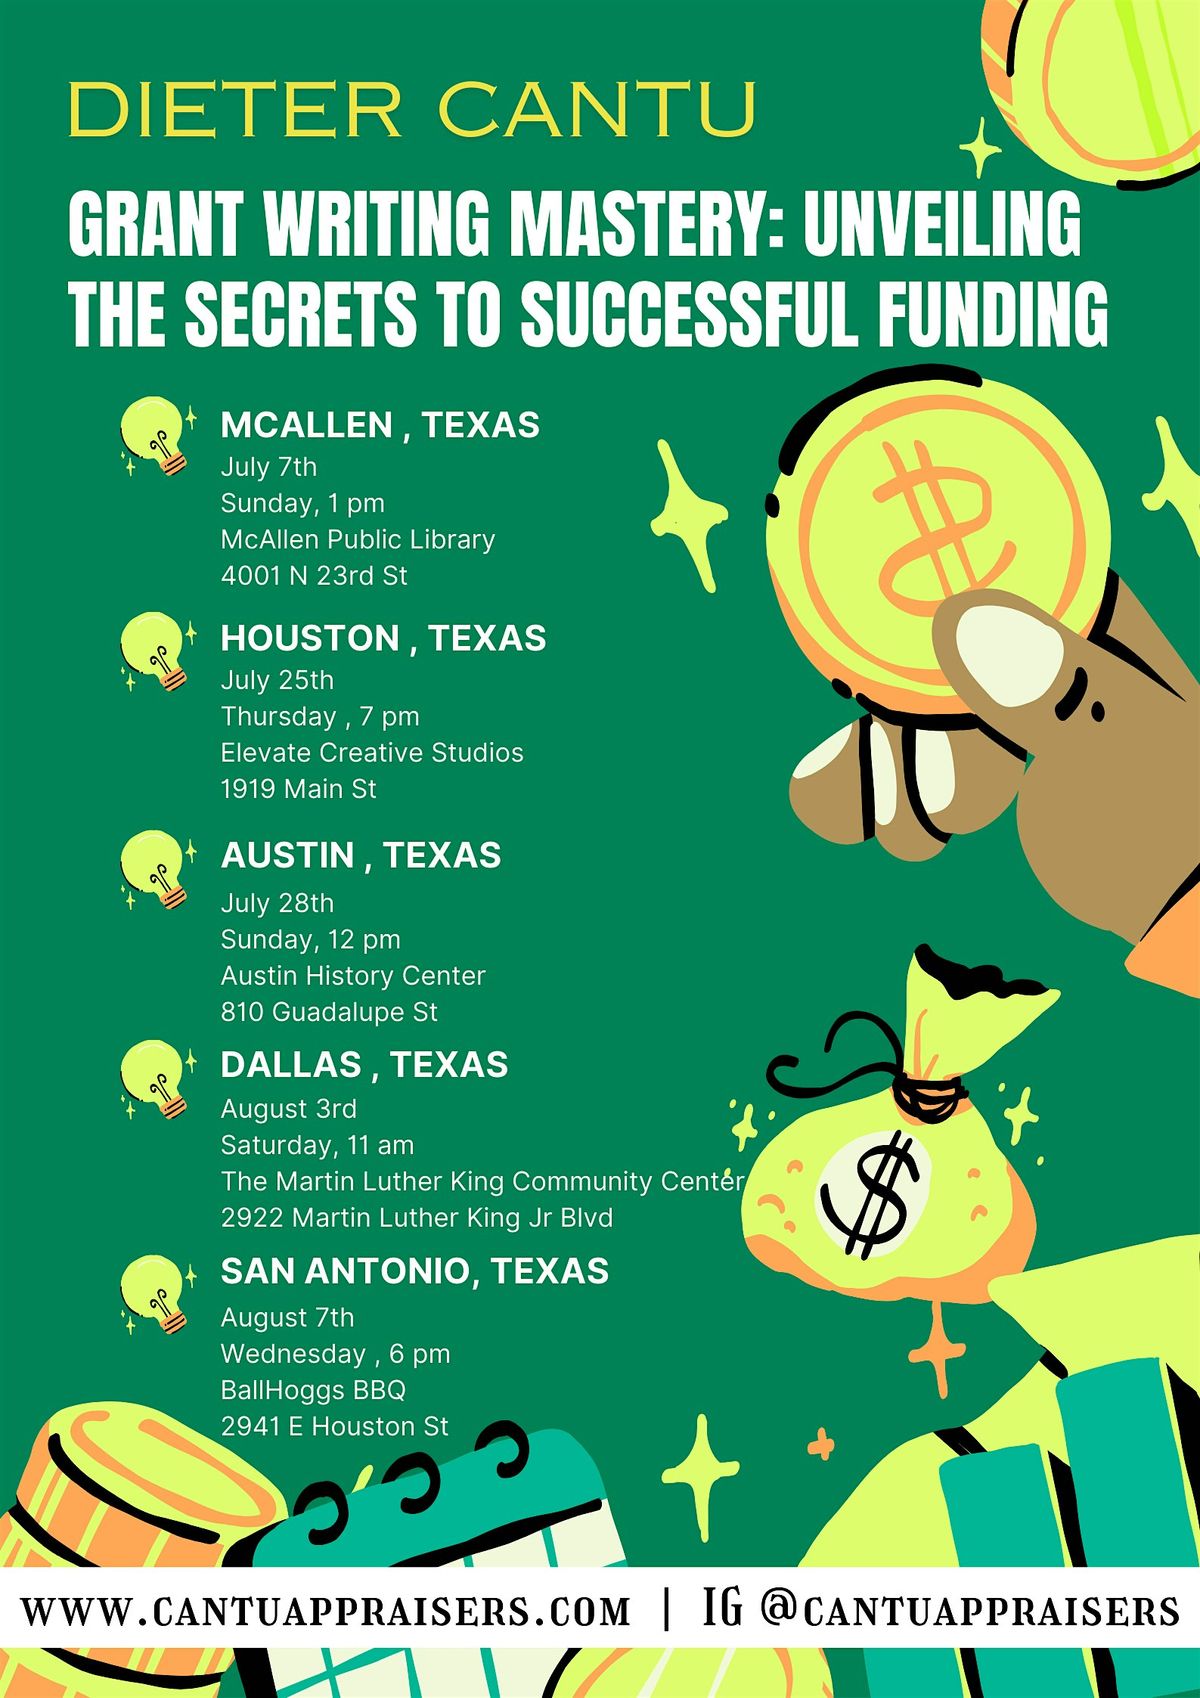 GRANT WRITING MASTERY UNVEILING THE SECRETS TO SUCCESSFUL FUNDING (MCALLEN)